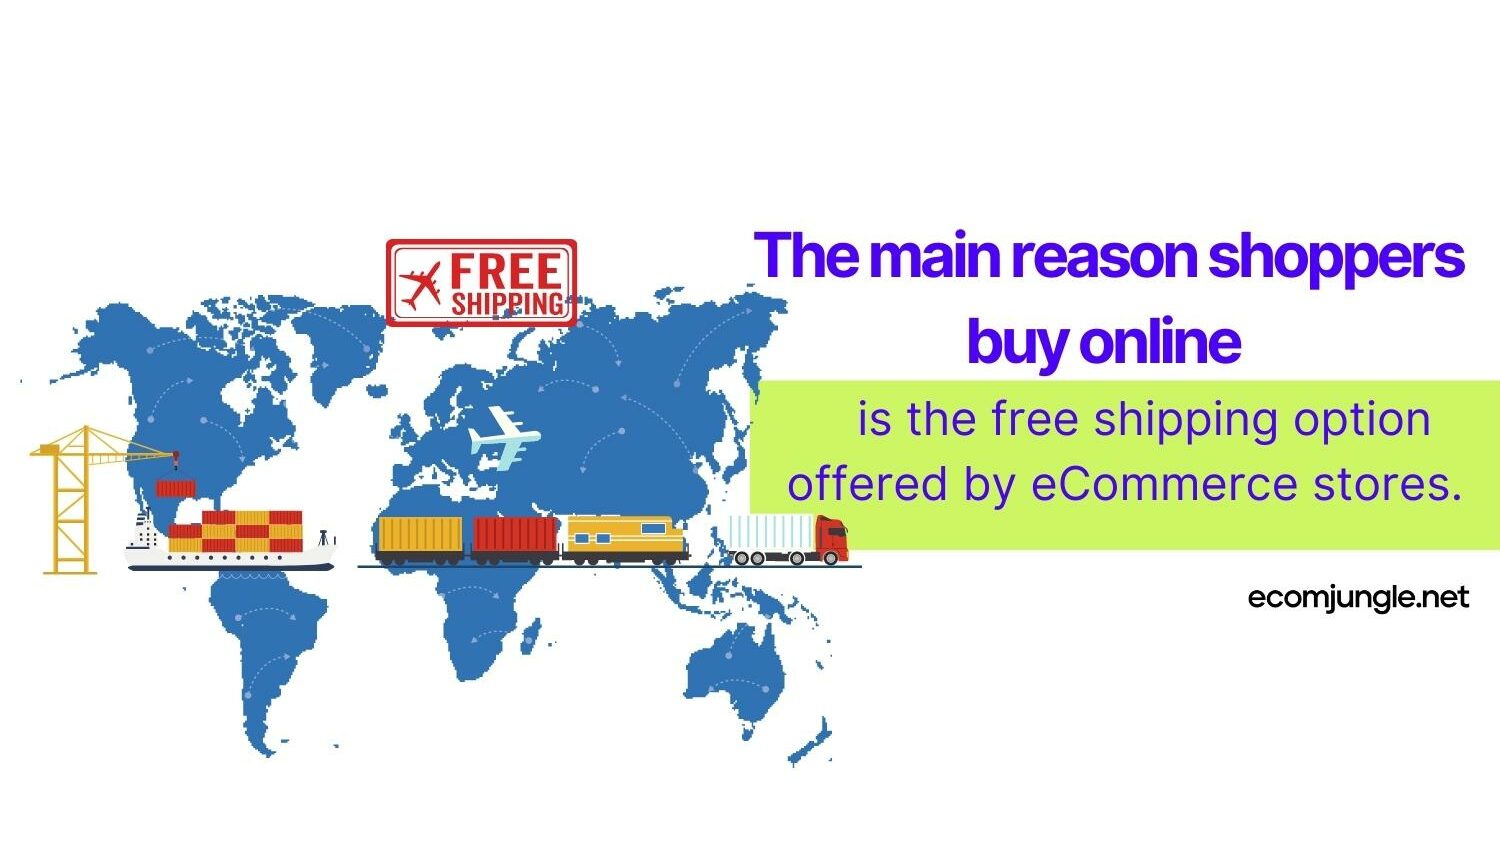 Free shipping is the key for costumers who shop online.